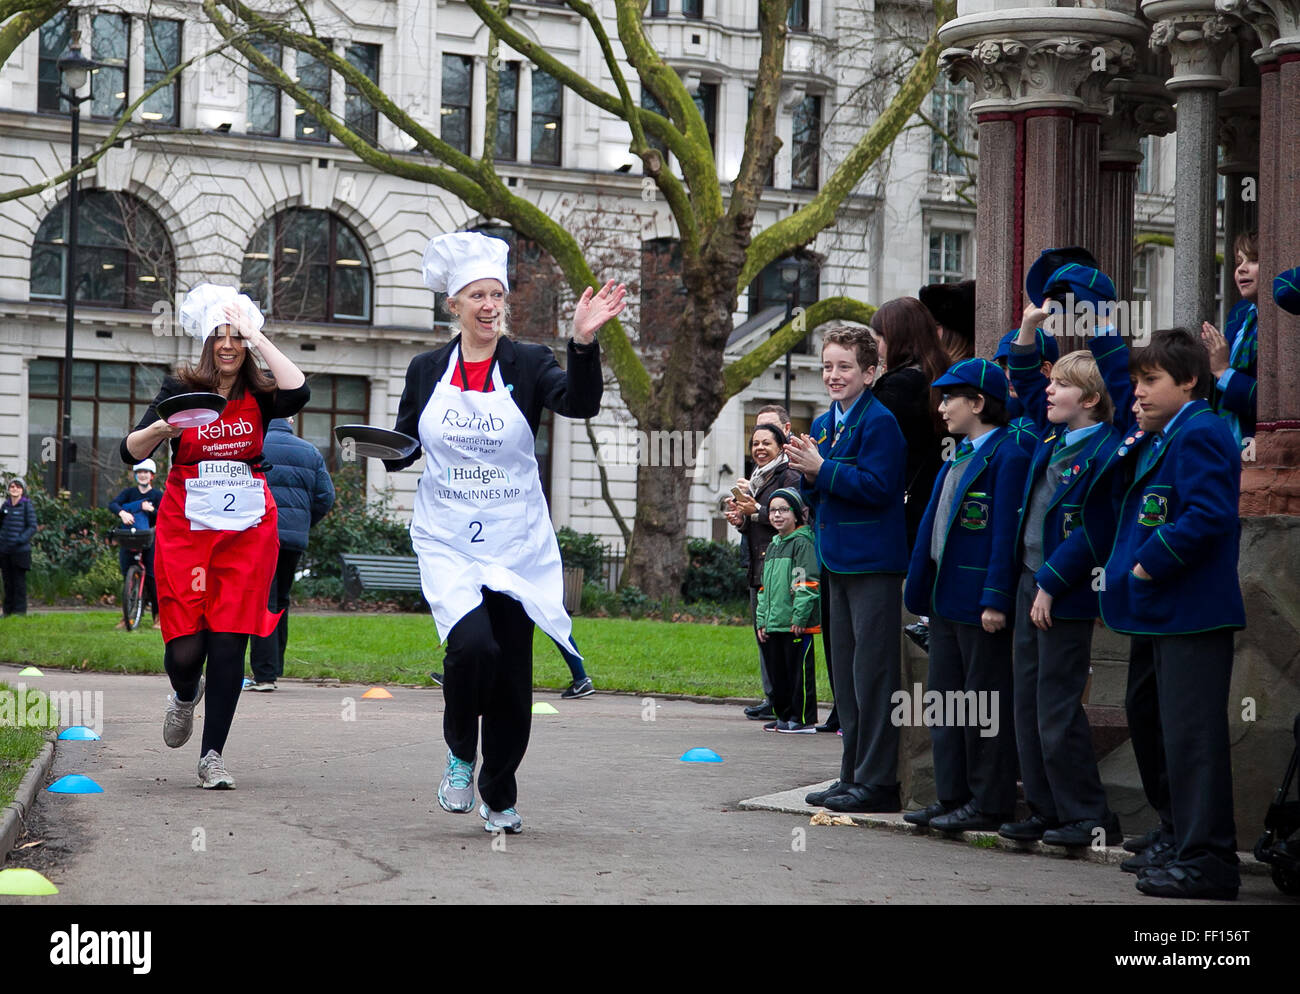 Westminster, London, United Kingdom. February 9th, 2016 - Liz Mcinnes MP and Caroline Wheeler, team captain of the media team runs at the Parliamentary pancake race in aid of the disability charity, Rehab  Credit:  Dinendra Haria/Alamy Live News Stock Photo